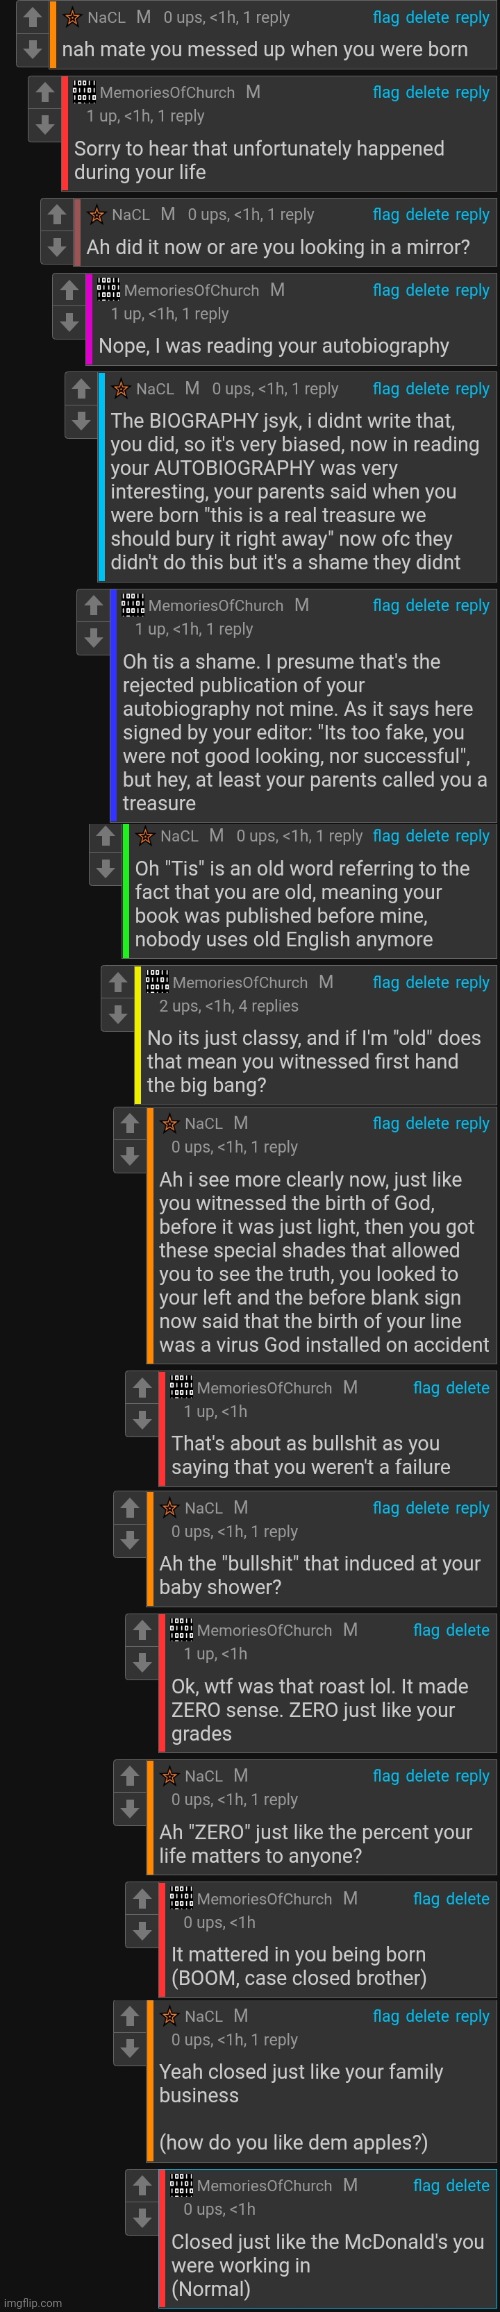 Just a normal conversation | image tagged in nacl,memoriesofchurch | made w/ Imgflip meme maker